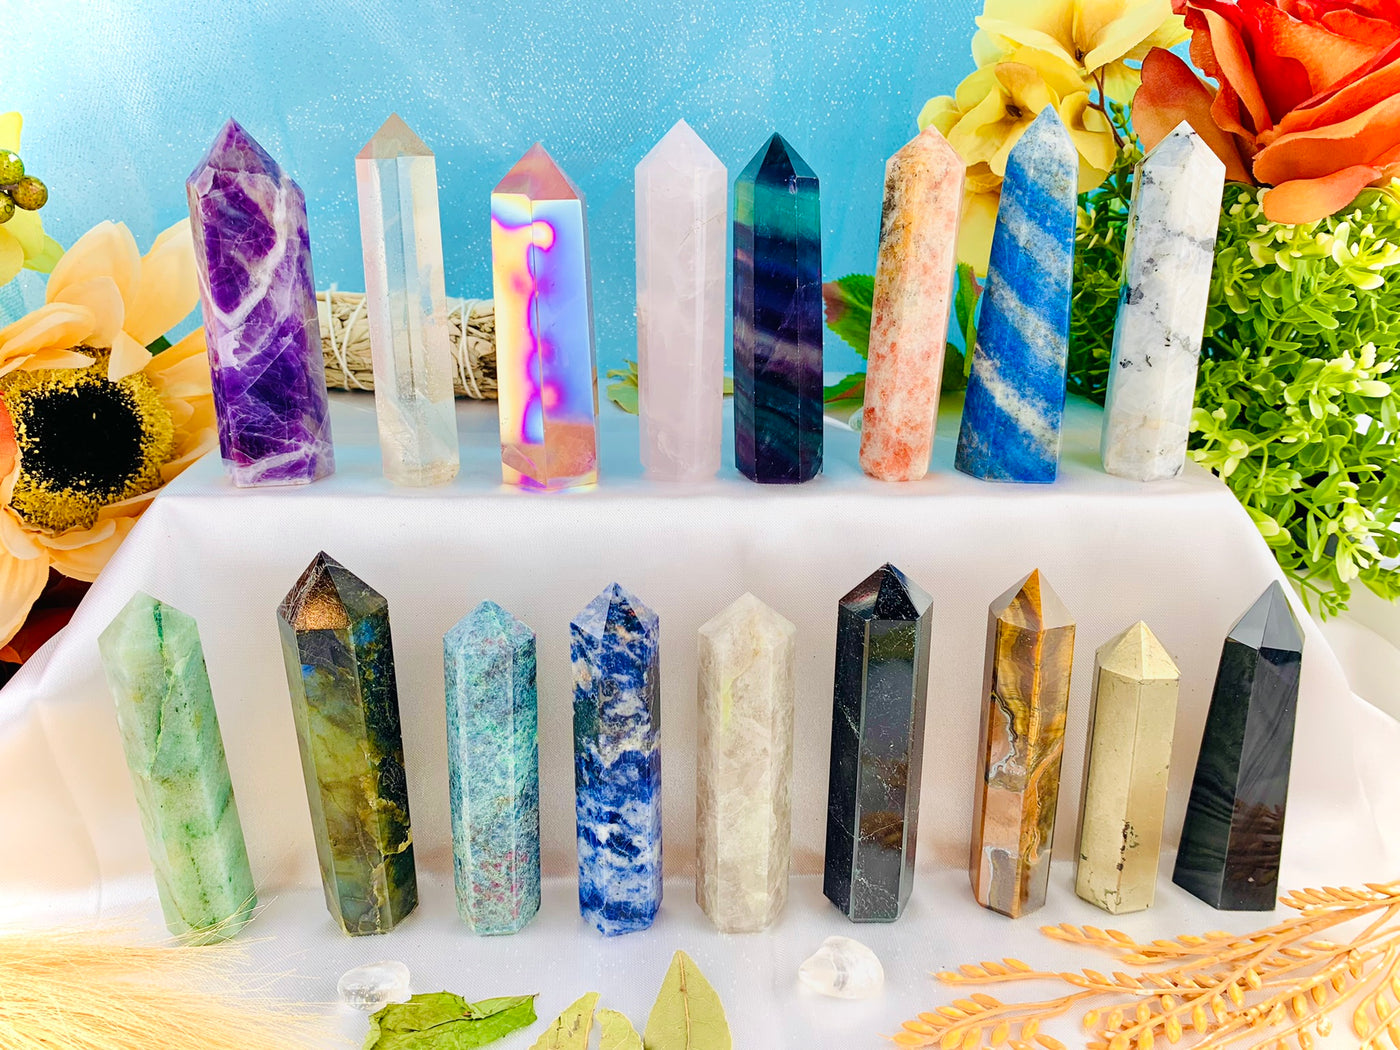 18 Healing Crystal Towers Obelisks For Money, Protection, Love, Strength